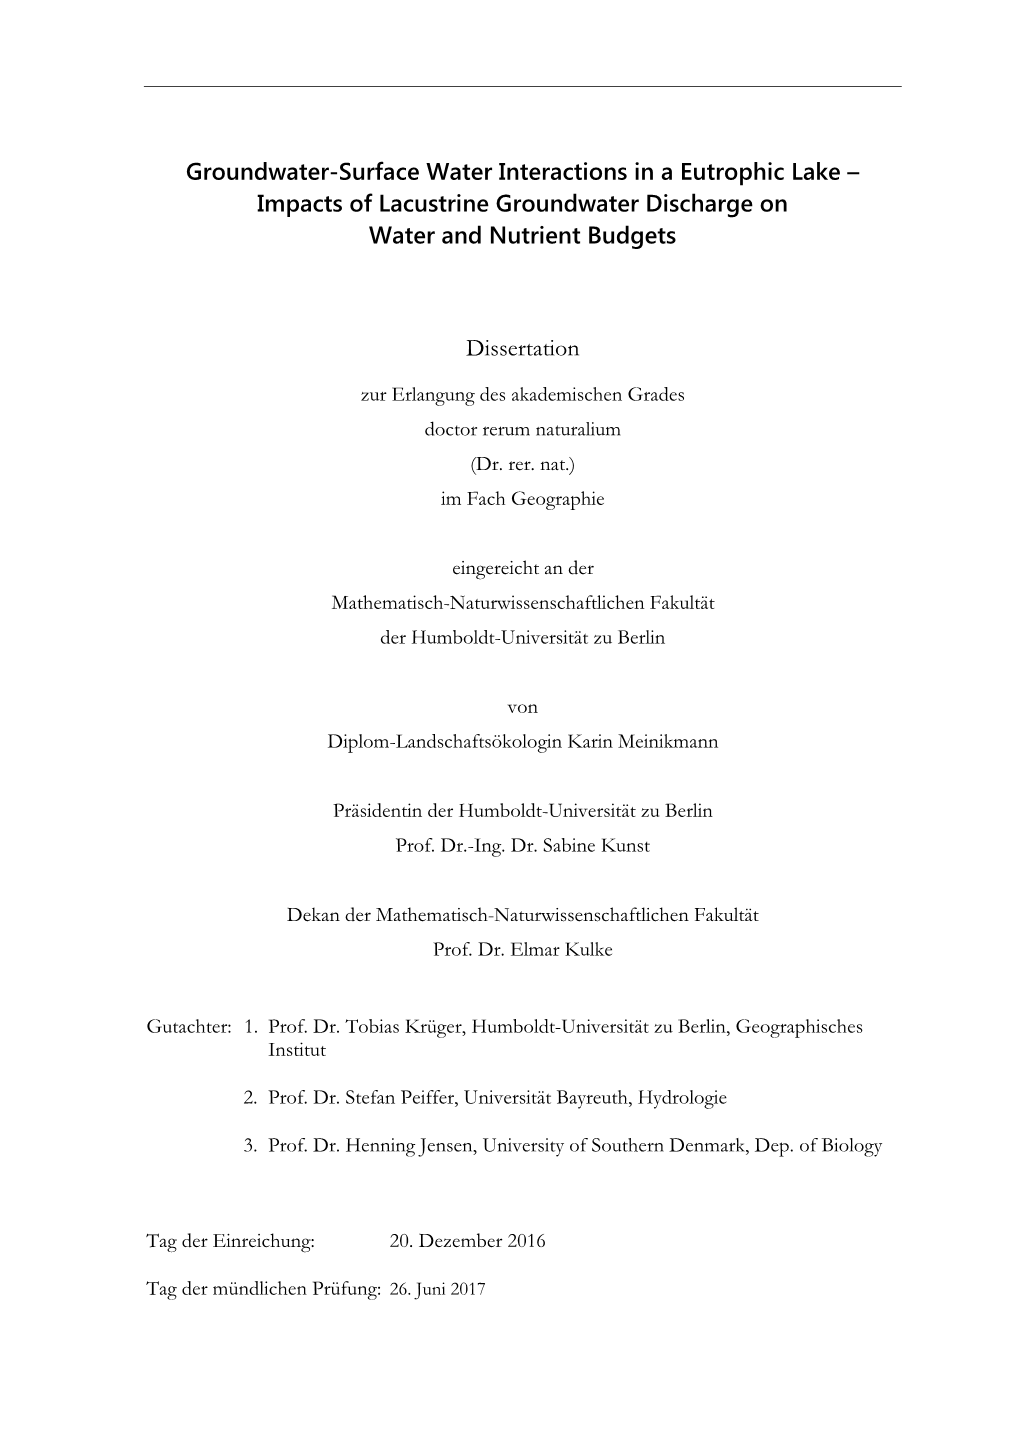 Impacts of Lacustrine Groundwater Discharge on Water and Nutrient Budgets